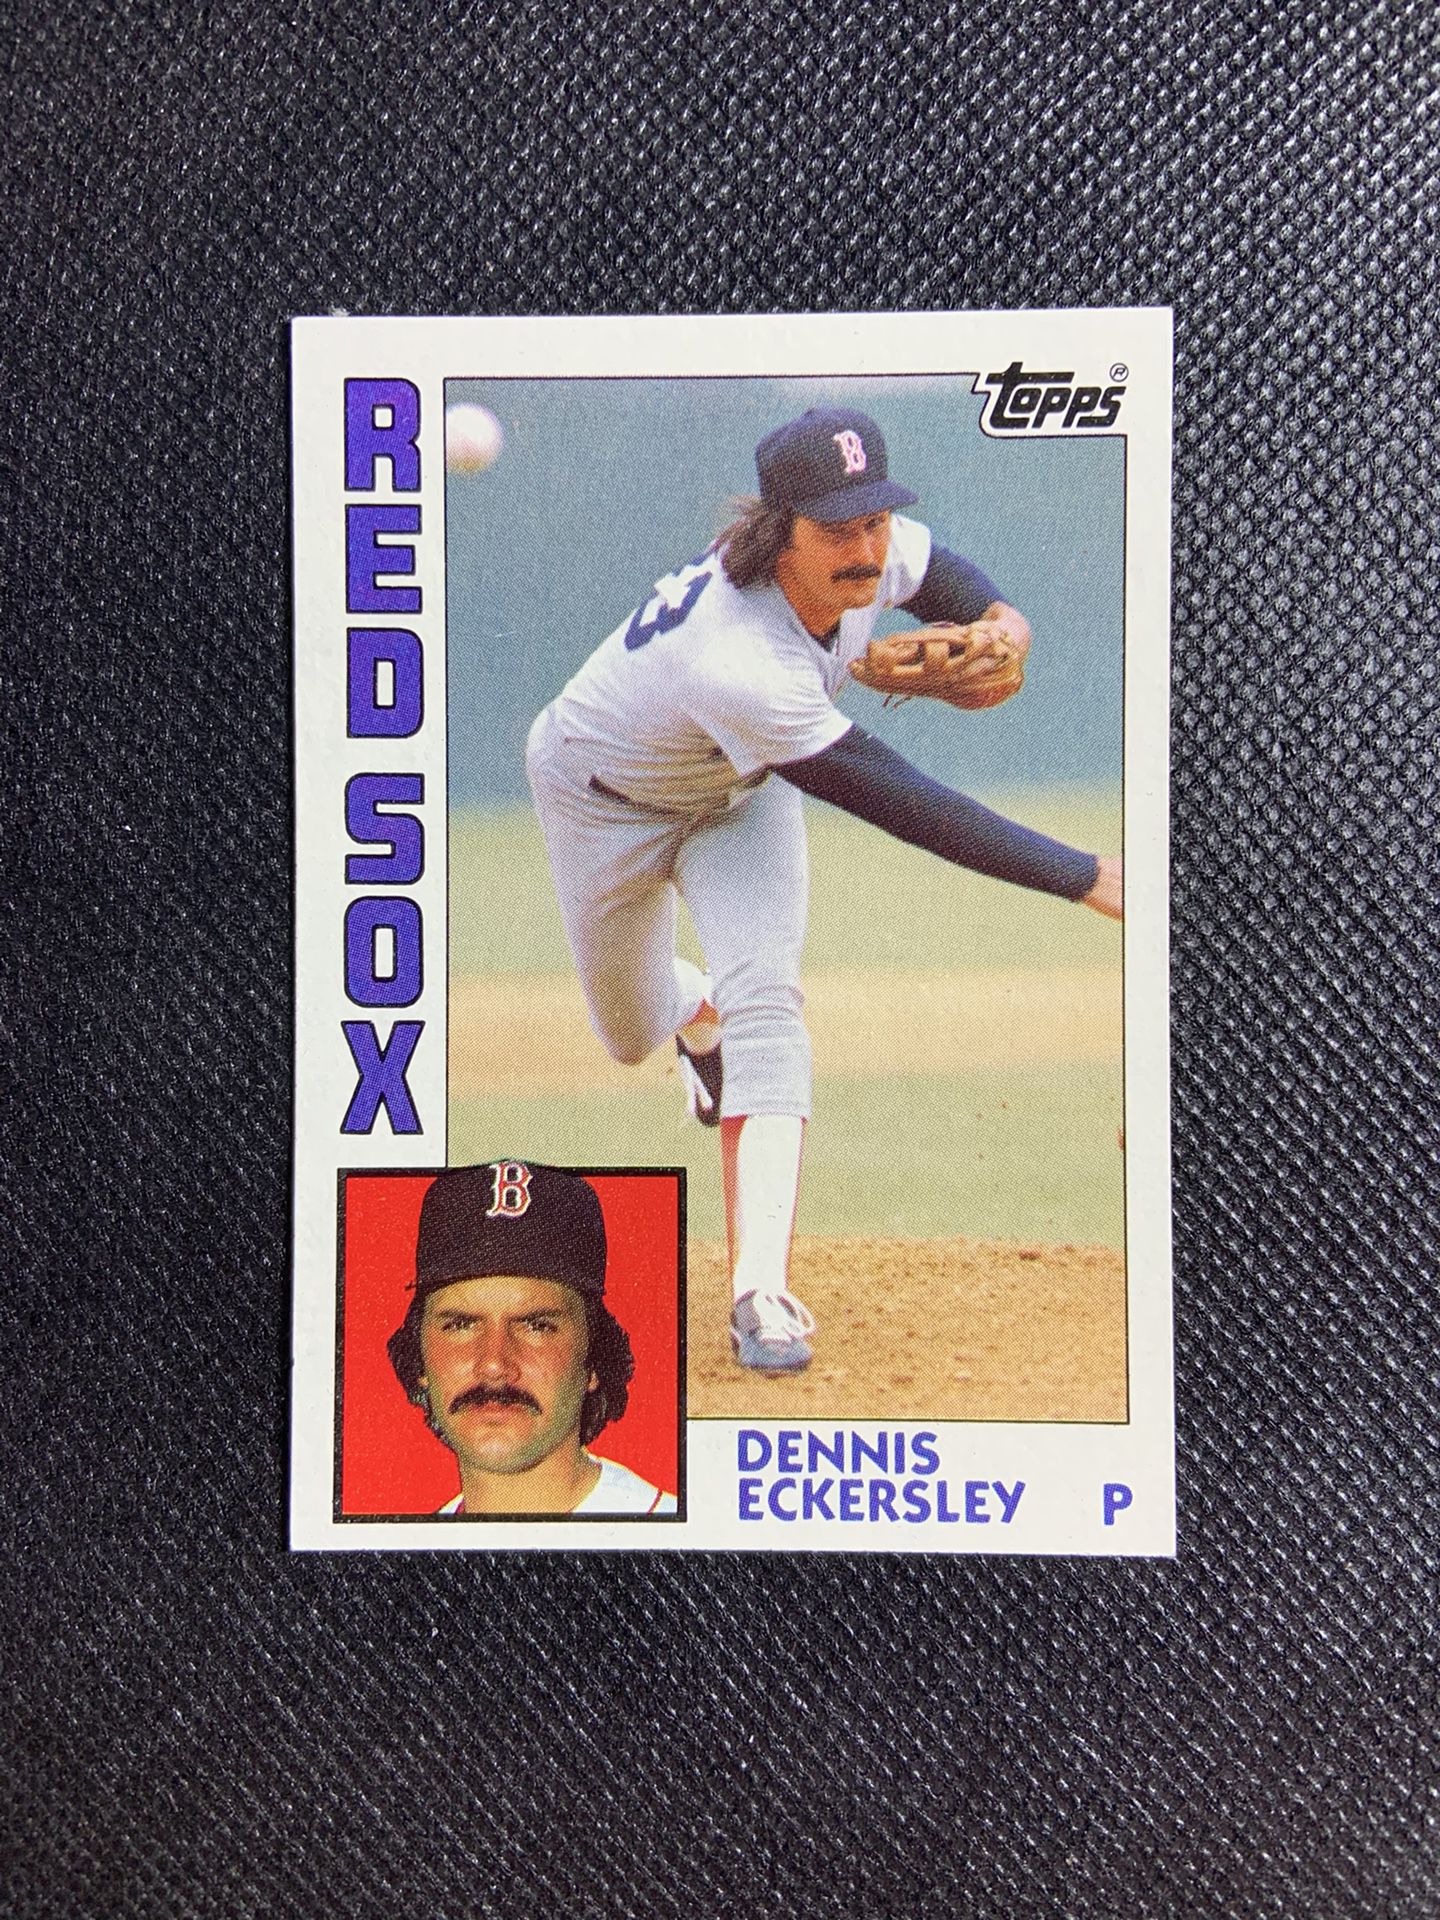 1984 Topps Dennis Eckersley Boston Red Sox MLB for Sale in La Mesa, CA -  OfferUp